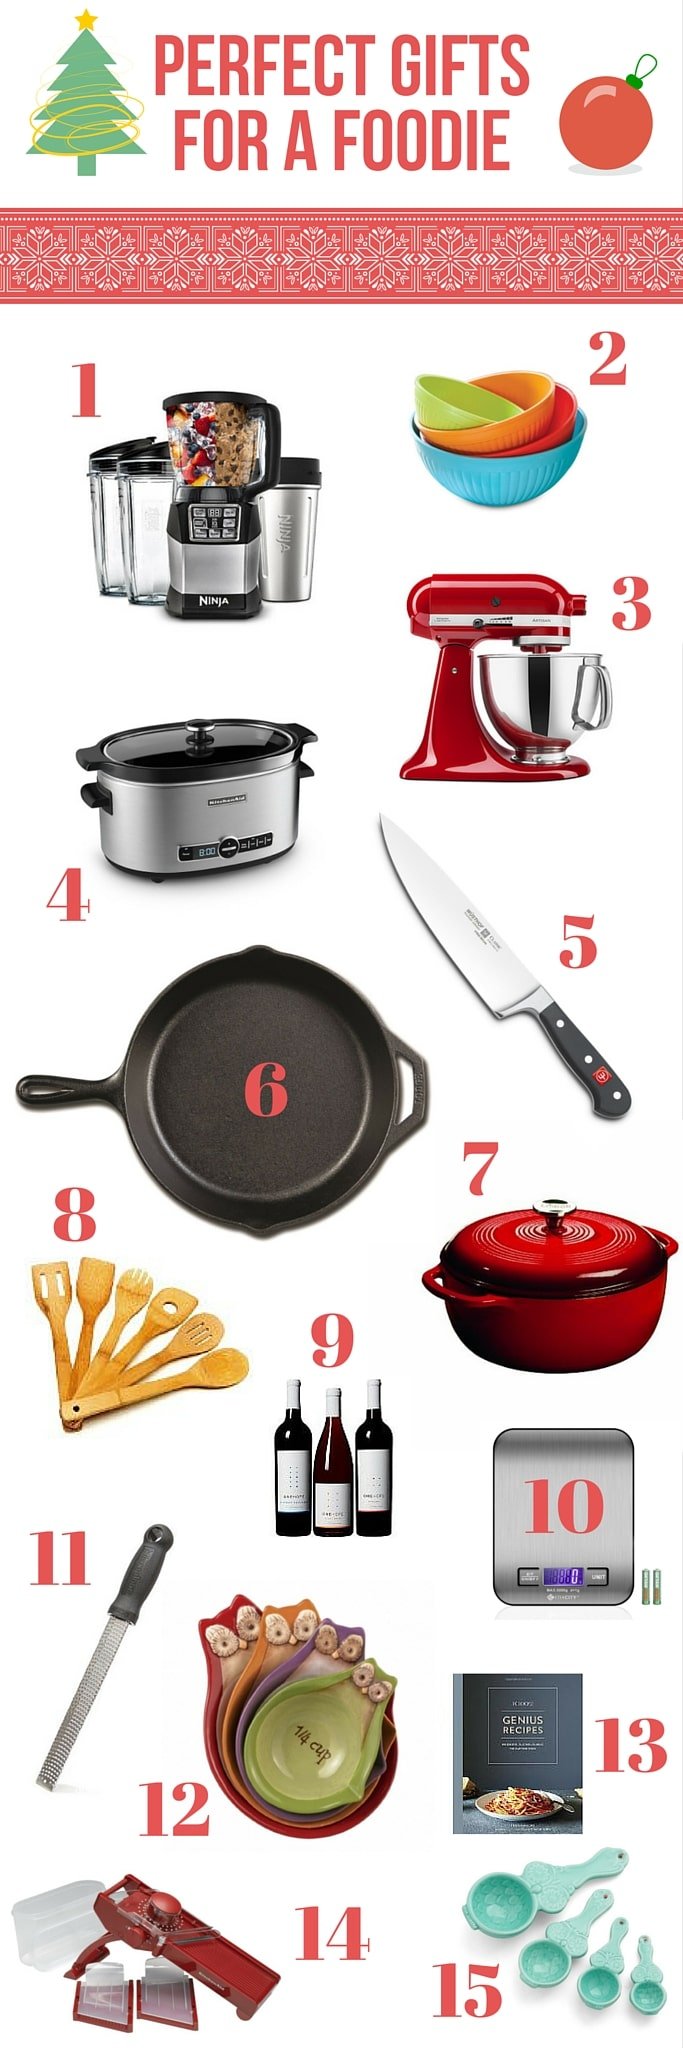 2015 Holiday Gift Guide For Foodies | www.oliviascuisine.com | The best holiday gifts for the foodie in your life!